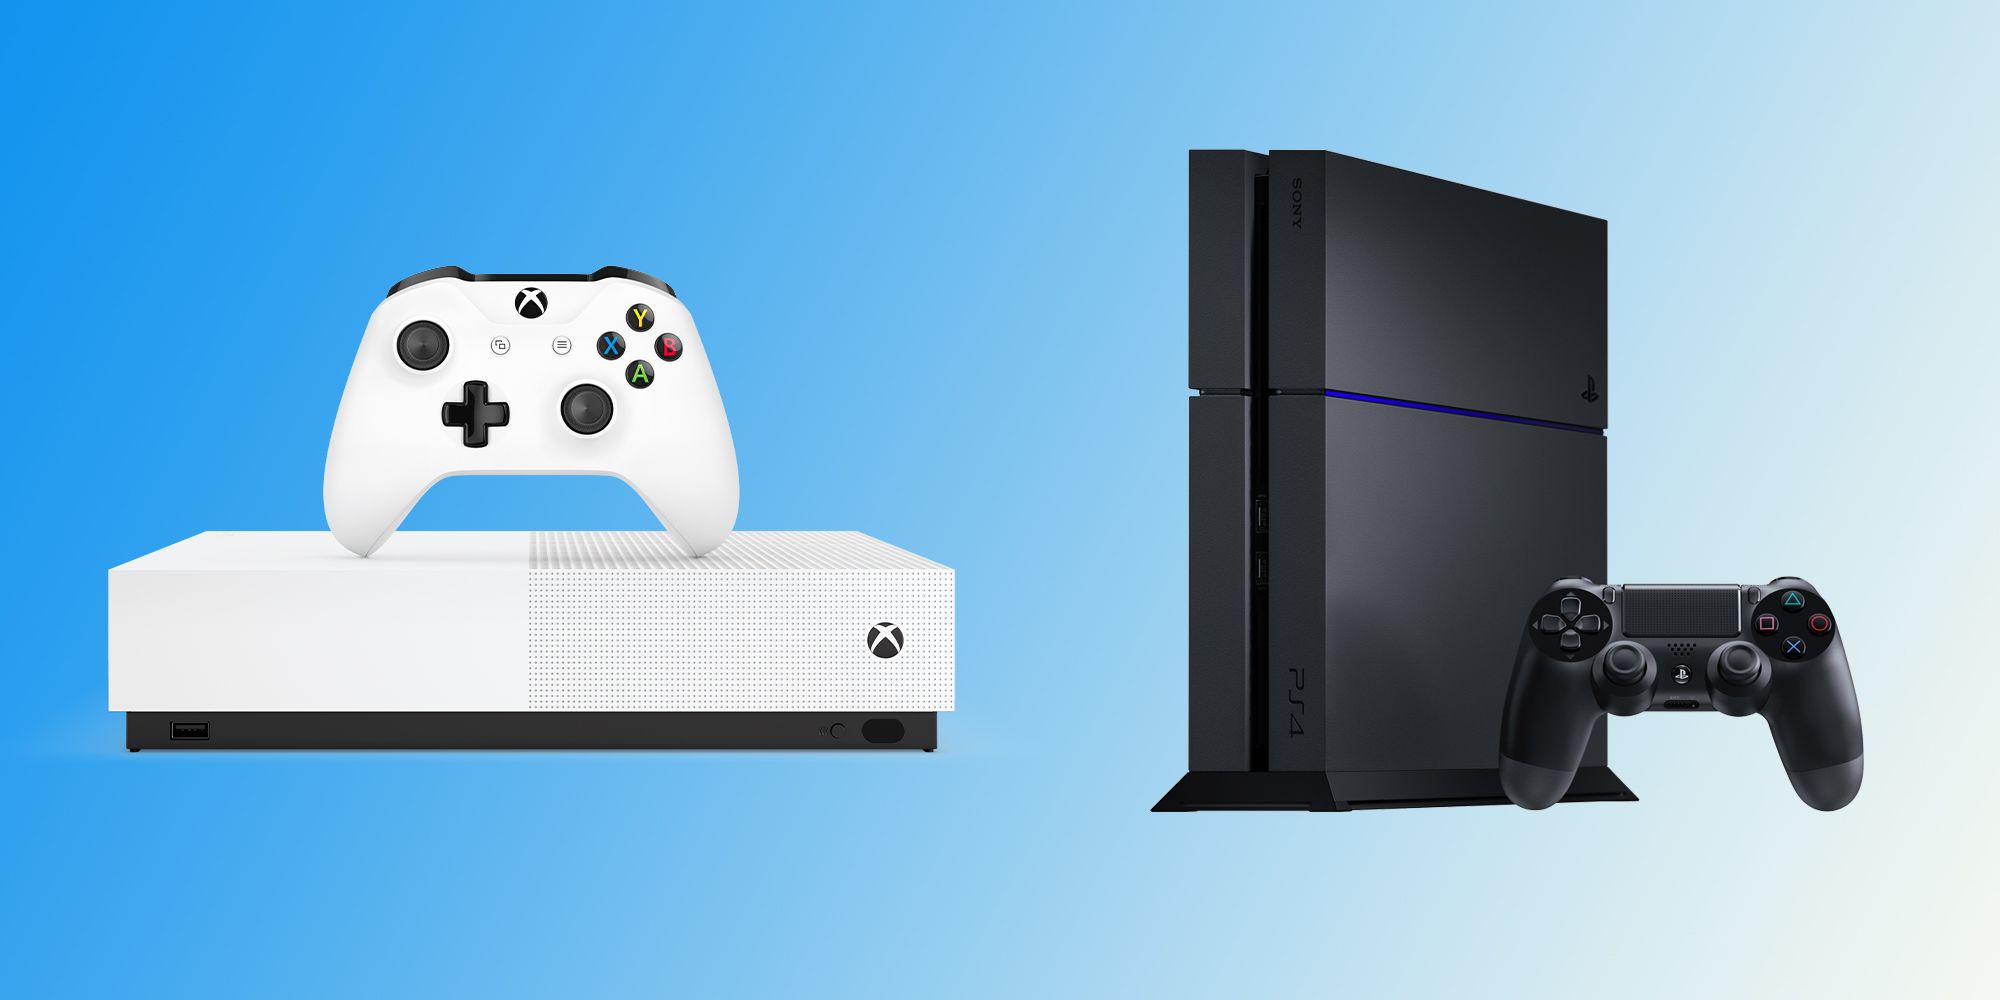 Verzamelen Ophef Perth Which Is Better: Xbox One or PlayStation 4?